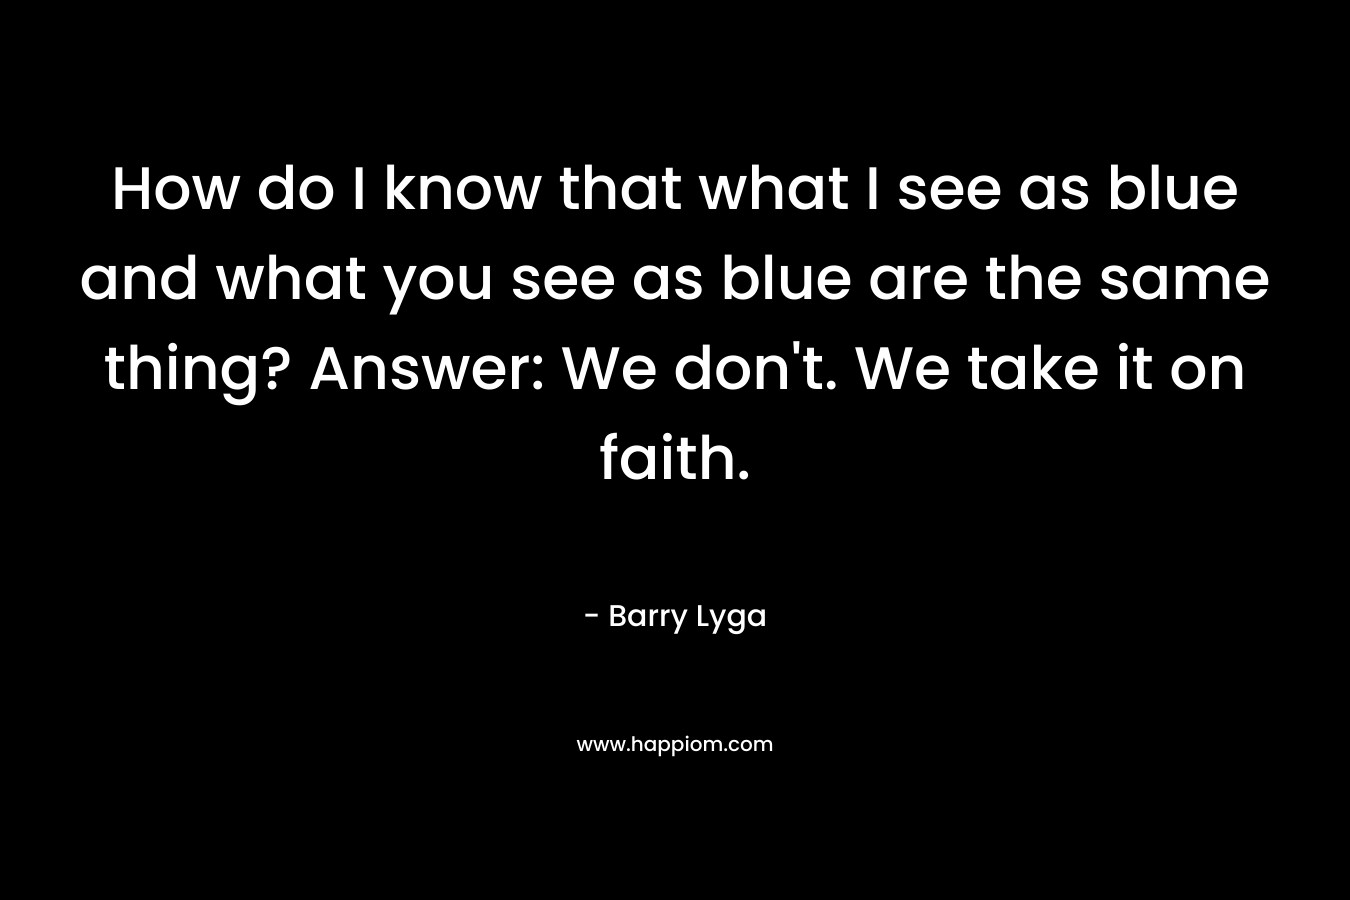 How do I know that what I see as blue and what you see as blue are the same thing? Answer: We don’t. We take it on faith. – Barry Lyga